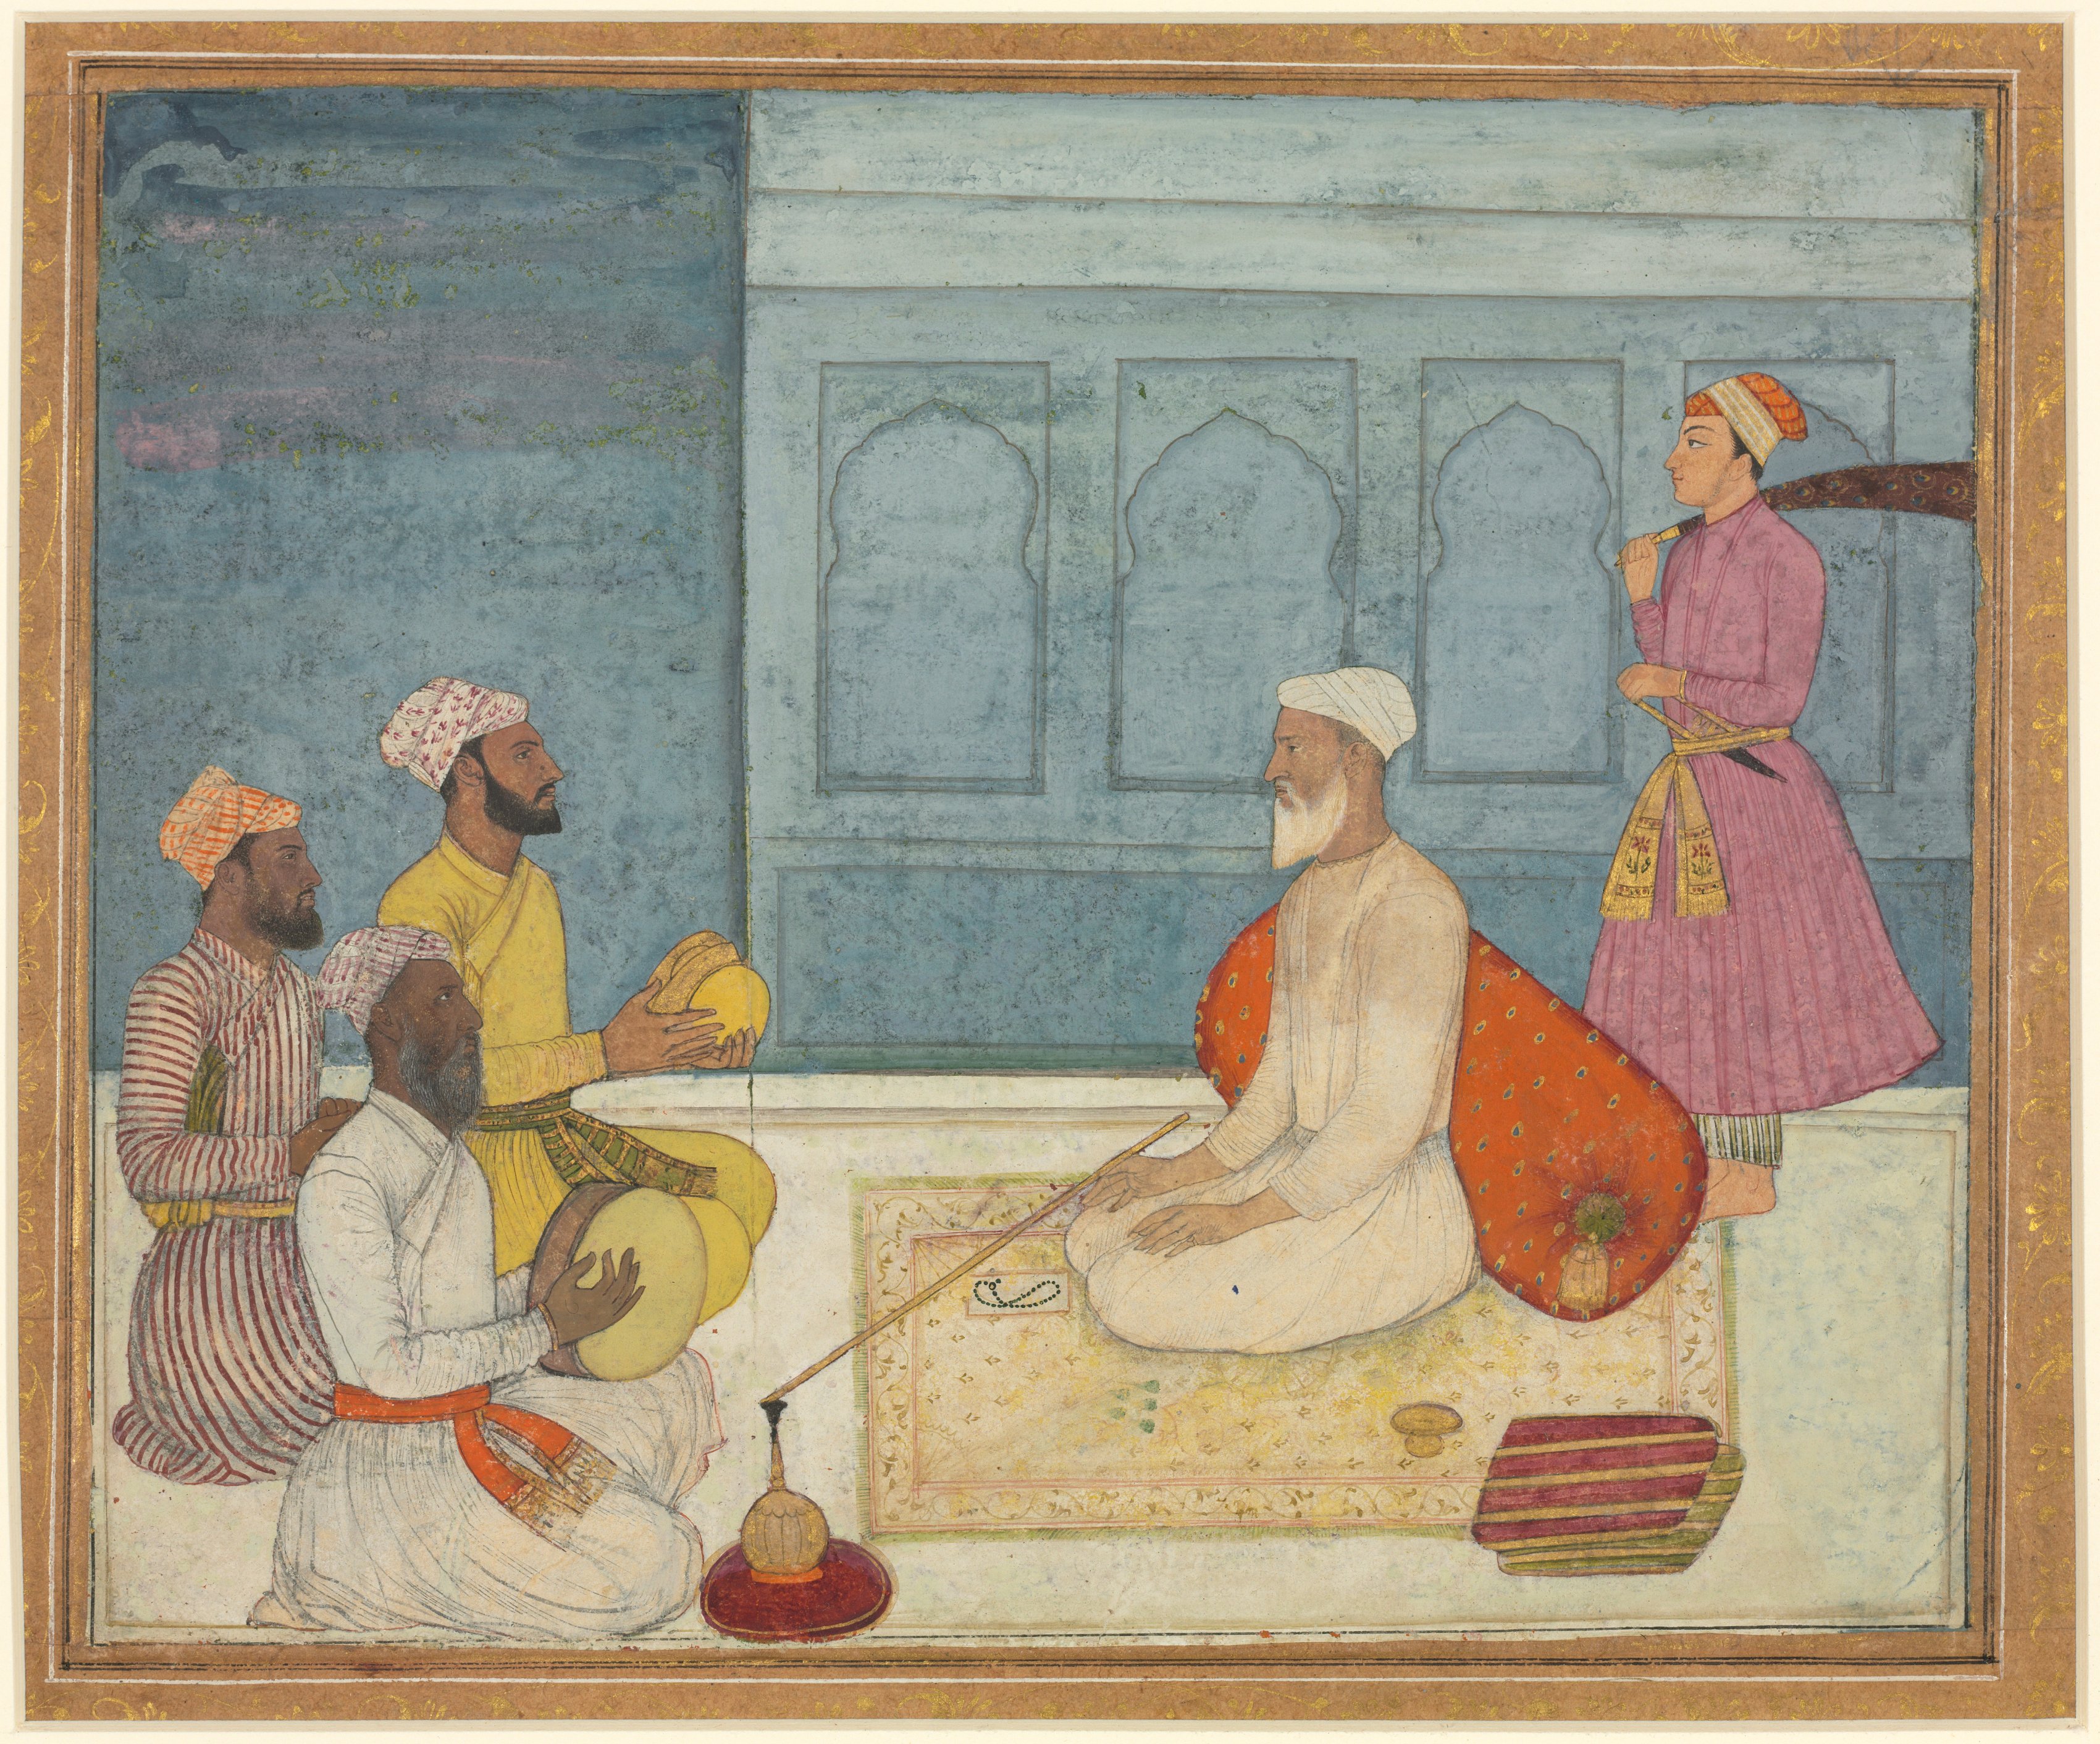 Sultan and Musicians